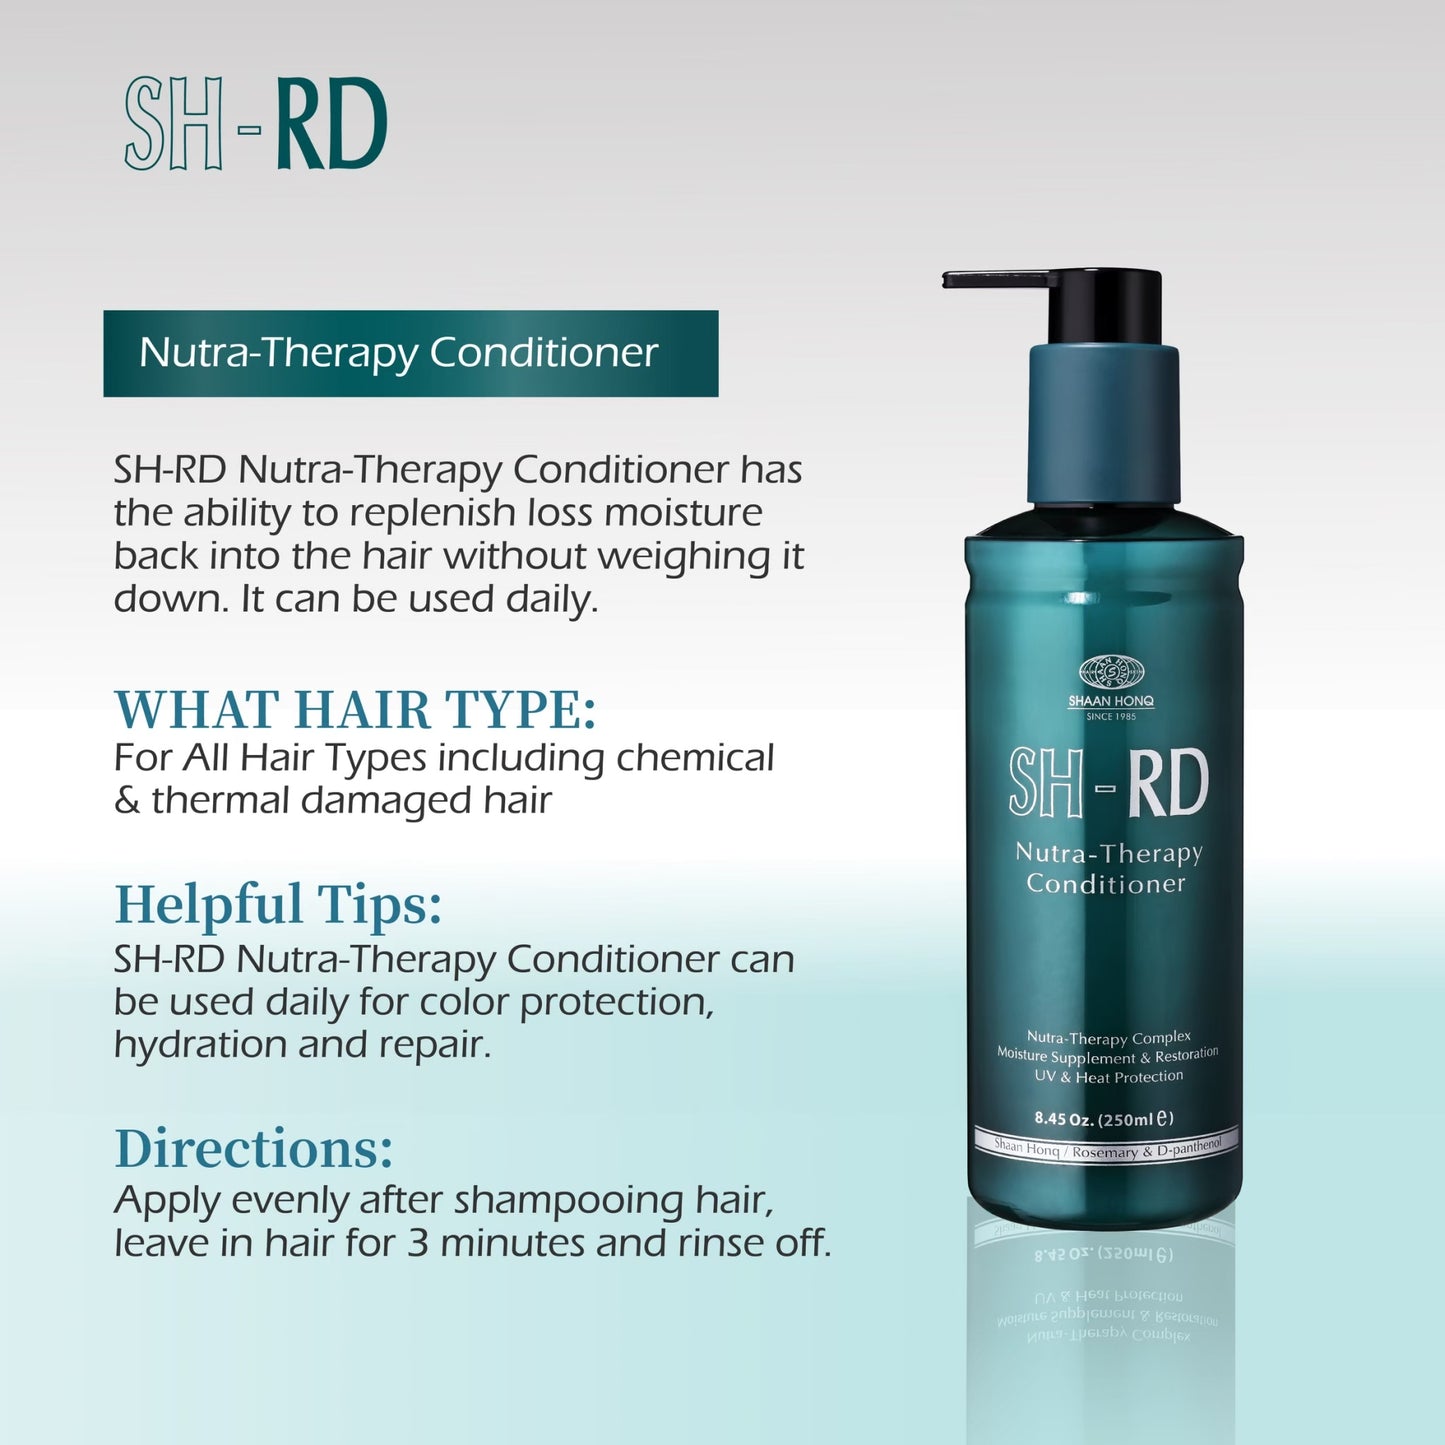 SH-RD Nutra-Therapy Conditioner (8.45oz/250ml)